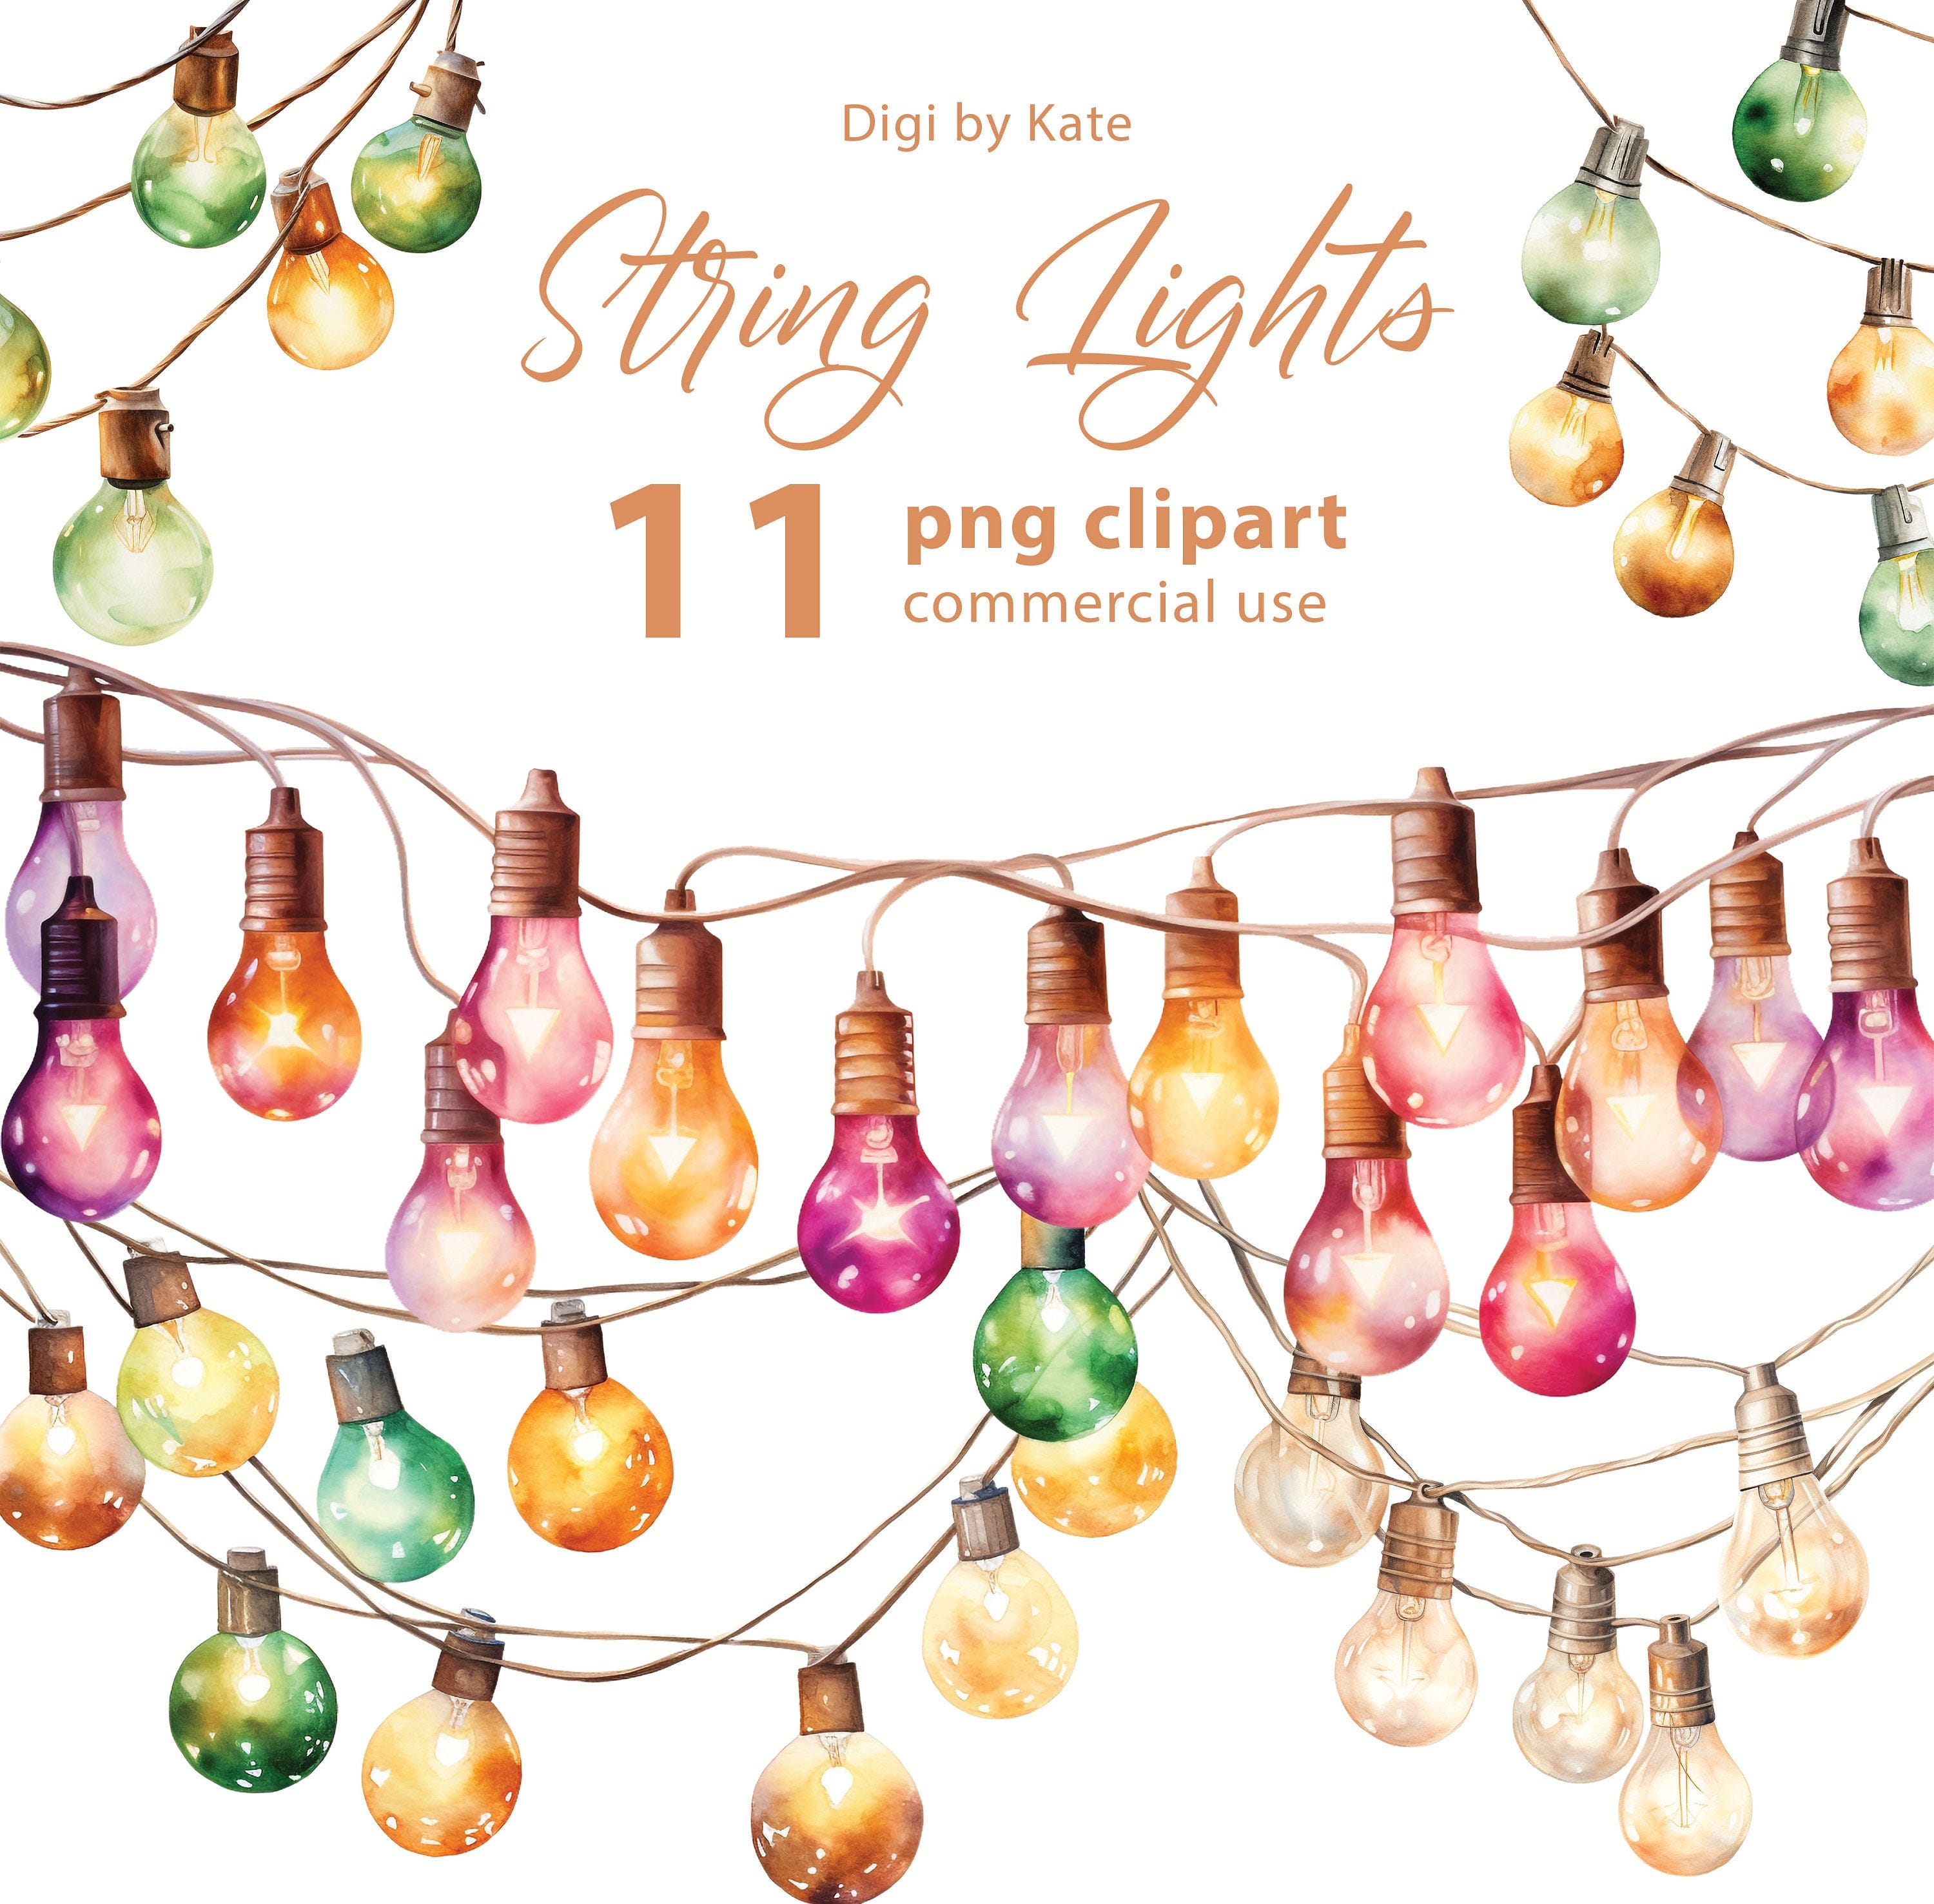 String Lights 11 PNG Clipart Set, Fairy Lights Watercolor, Colorful Party Holiday String Lights, Junk Journals, Transparent Background